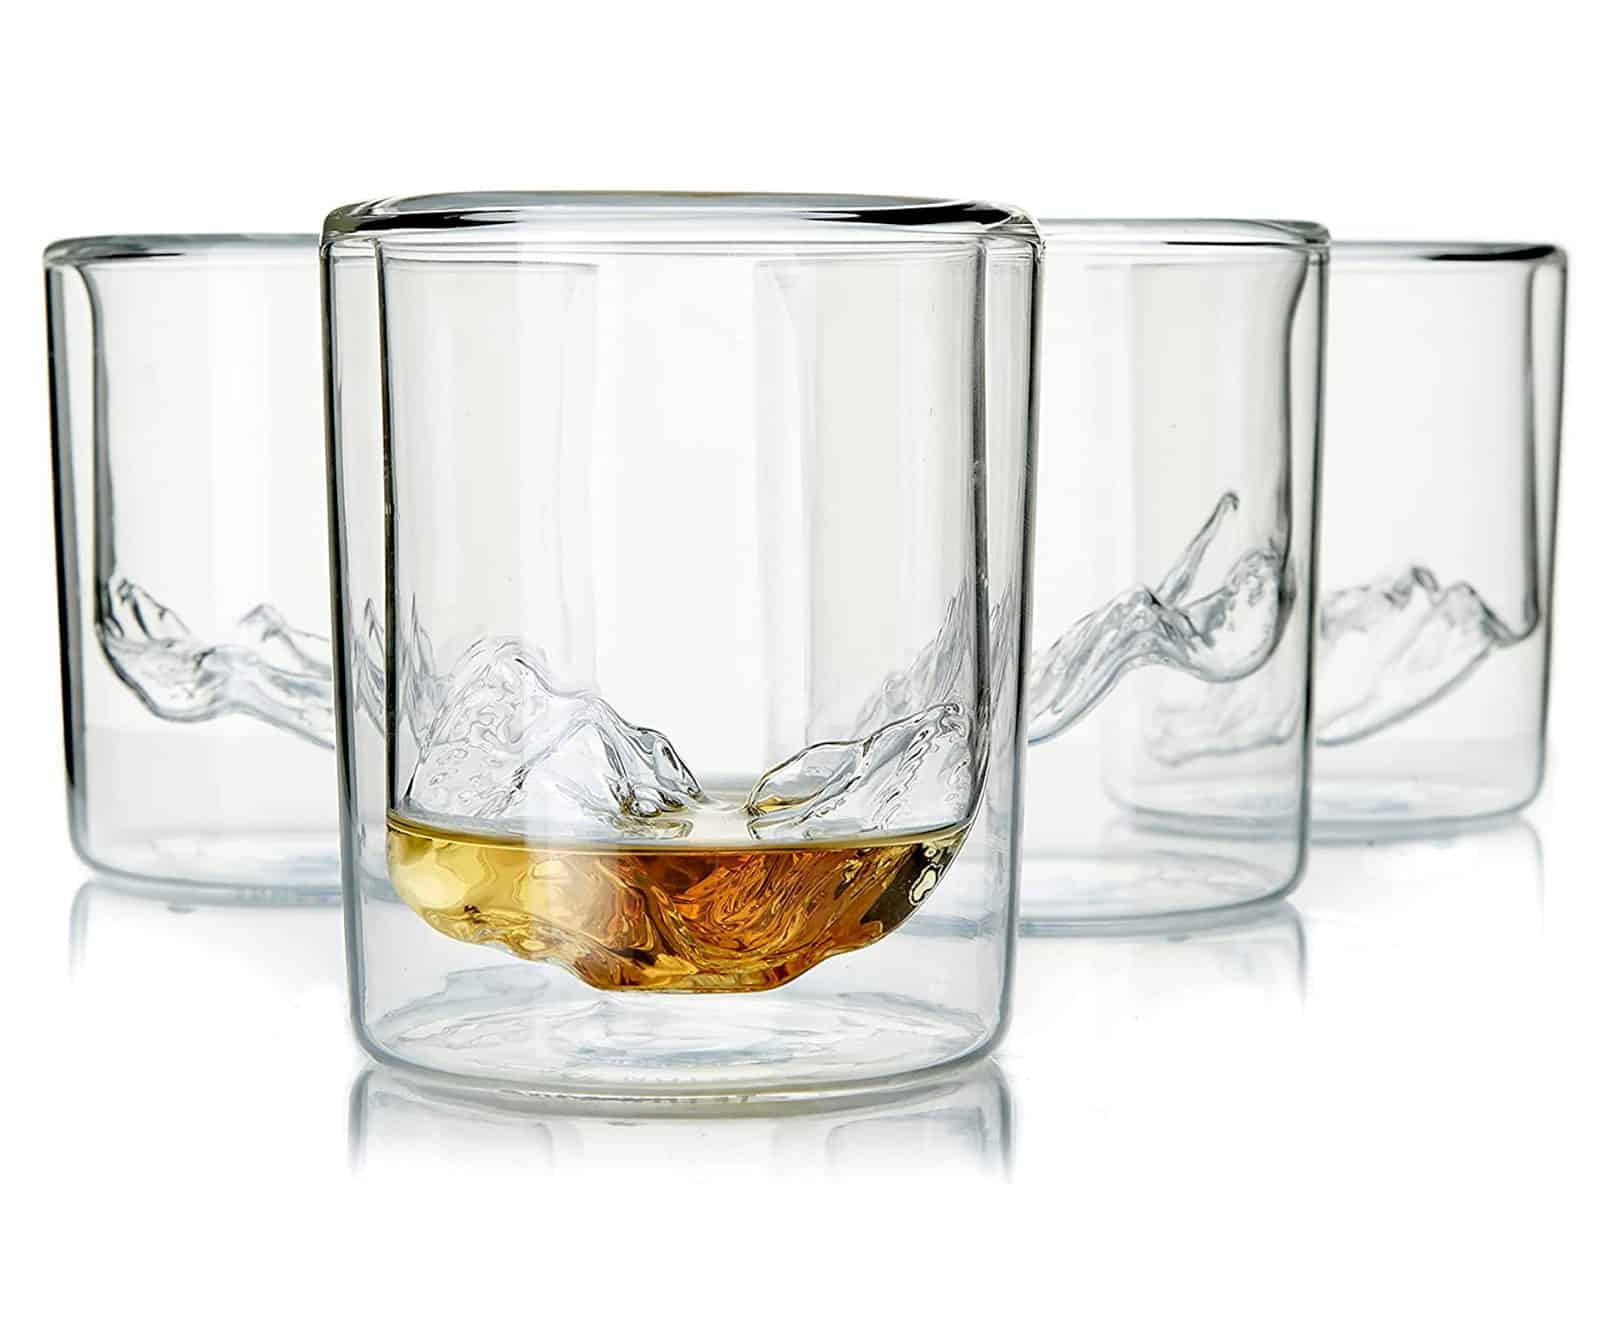 Bar glasses with topographic impressions of national park mountains